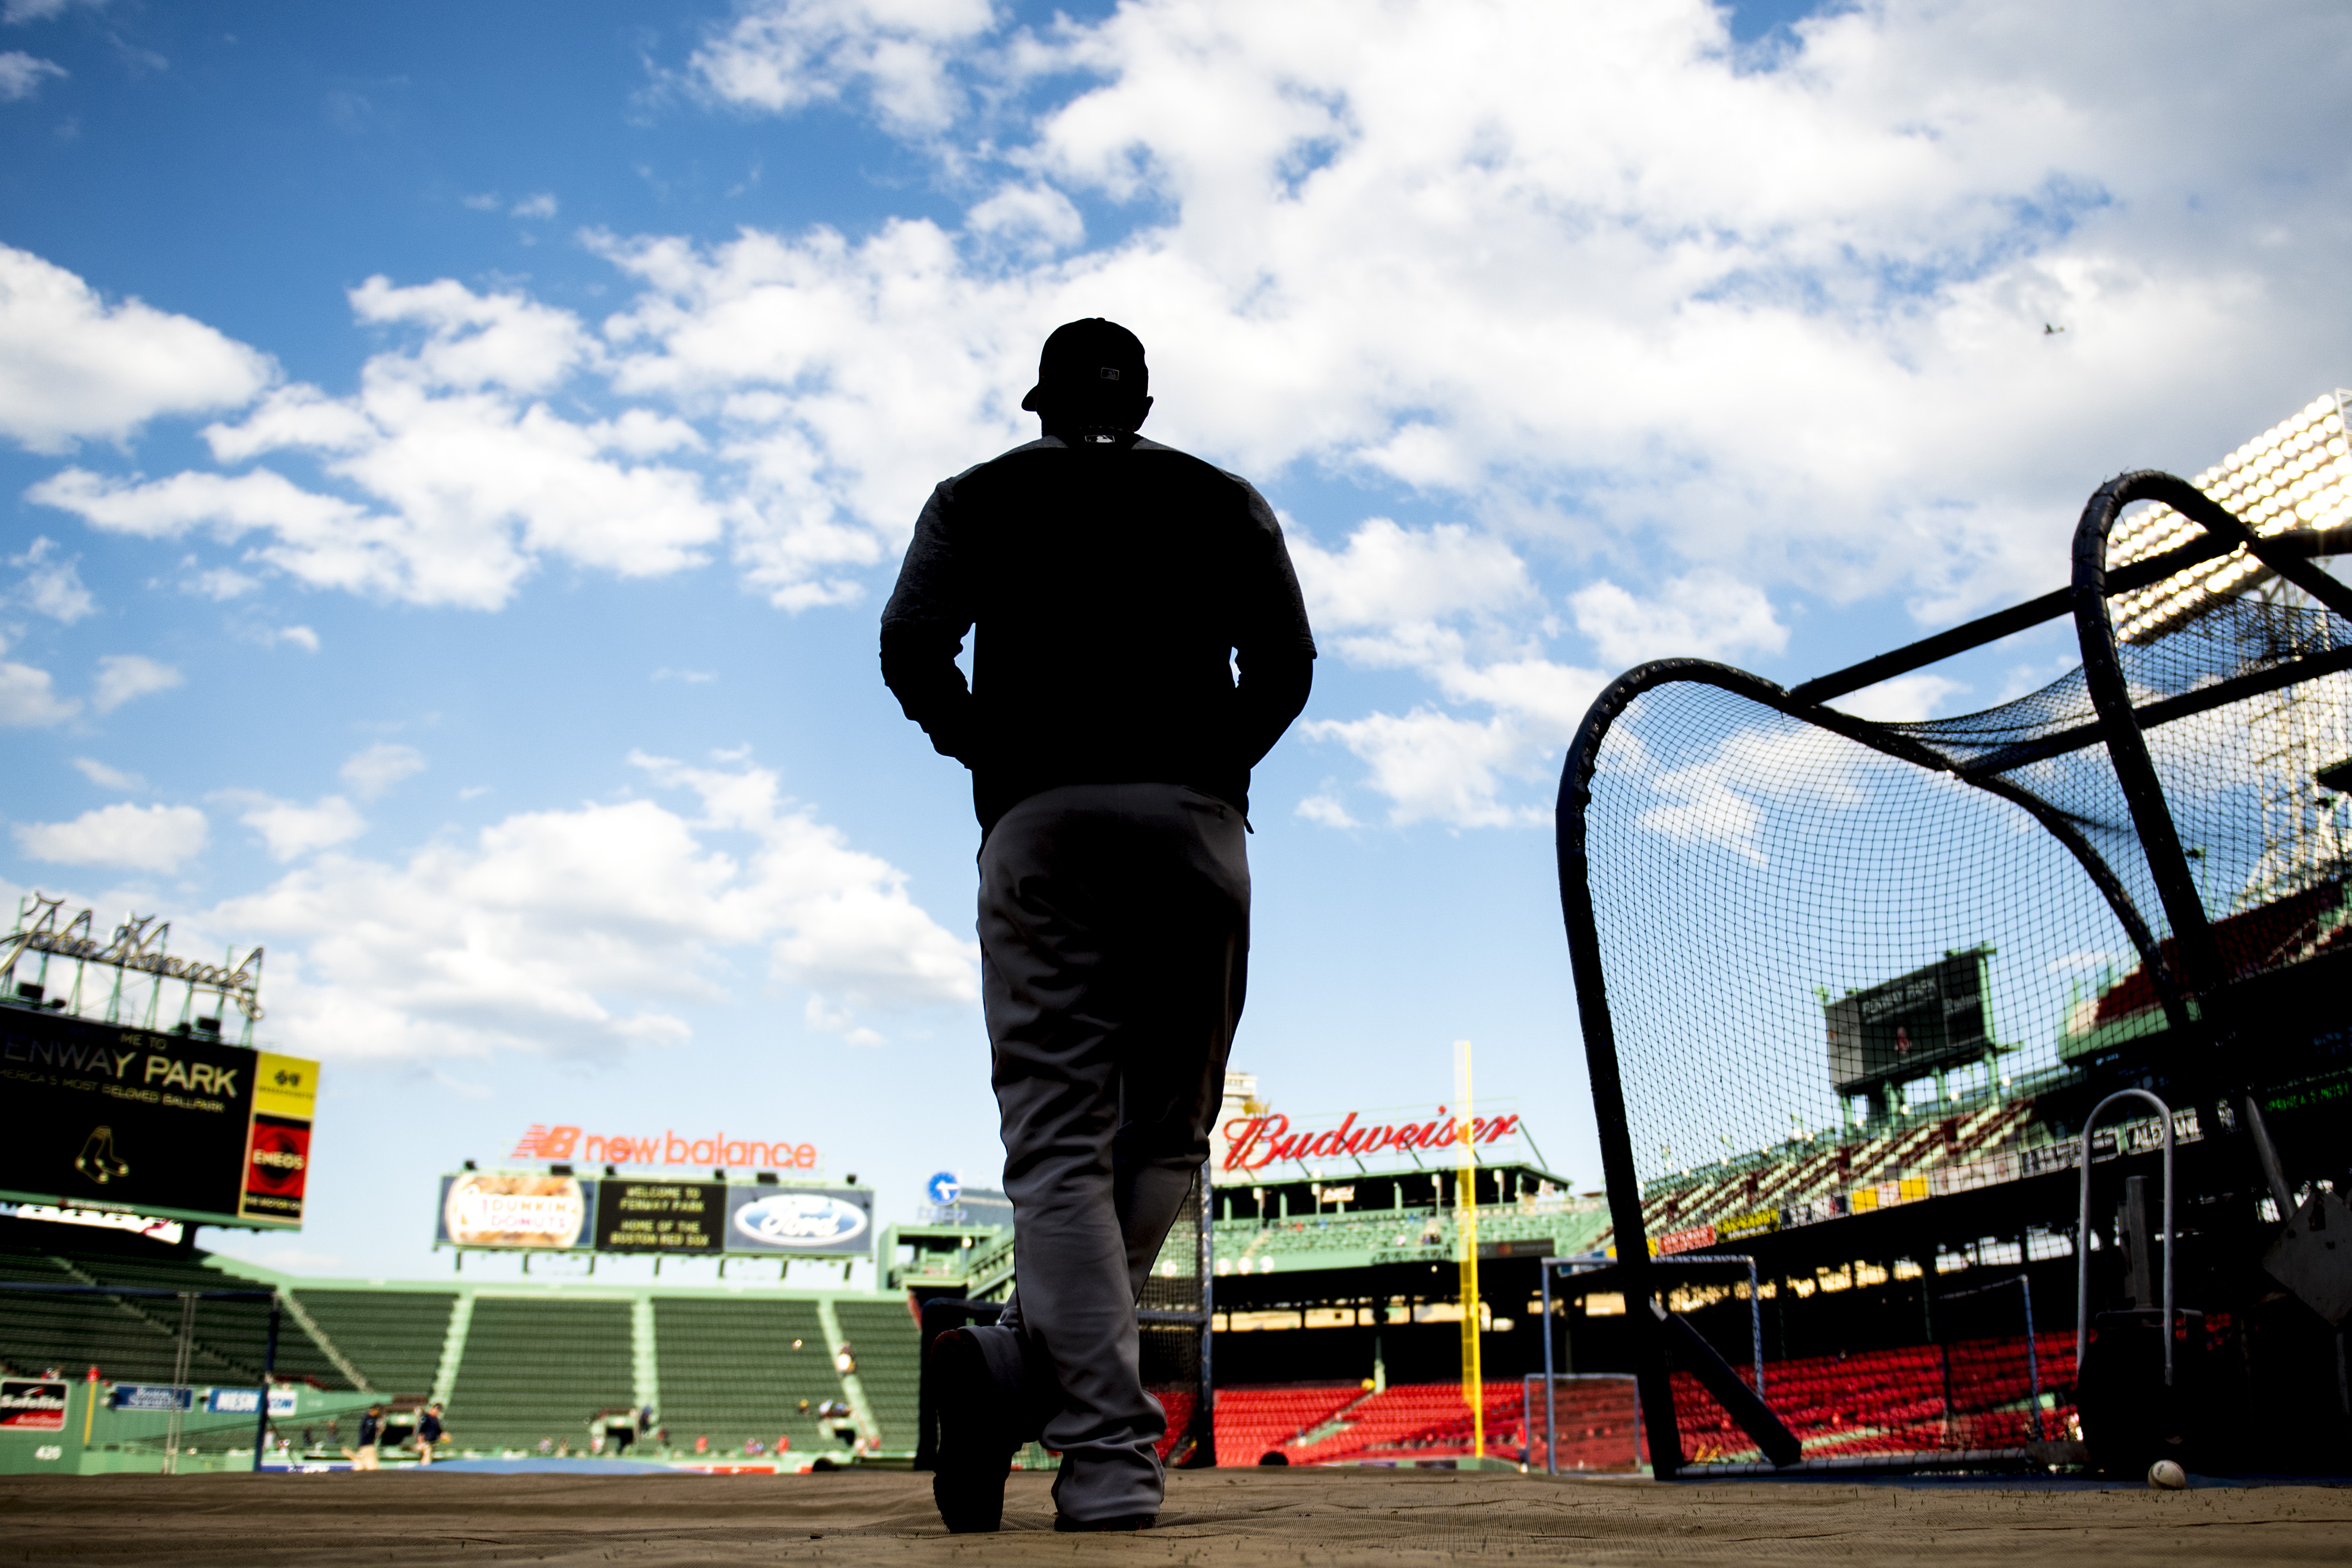 Adam Jones of the Baltimore Orioles looks on before a game against the Boston Red Sox on May 2, 2017 at Fenway Park in Boston. (Billie Weiss/Boston Red Sox—Getty Images)